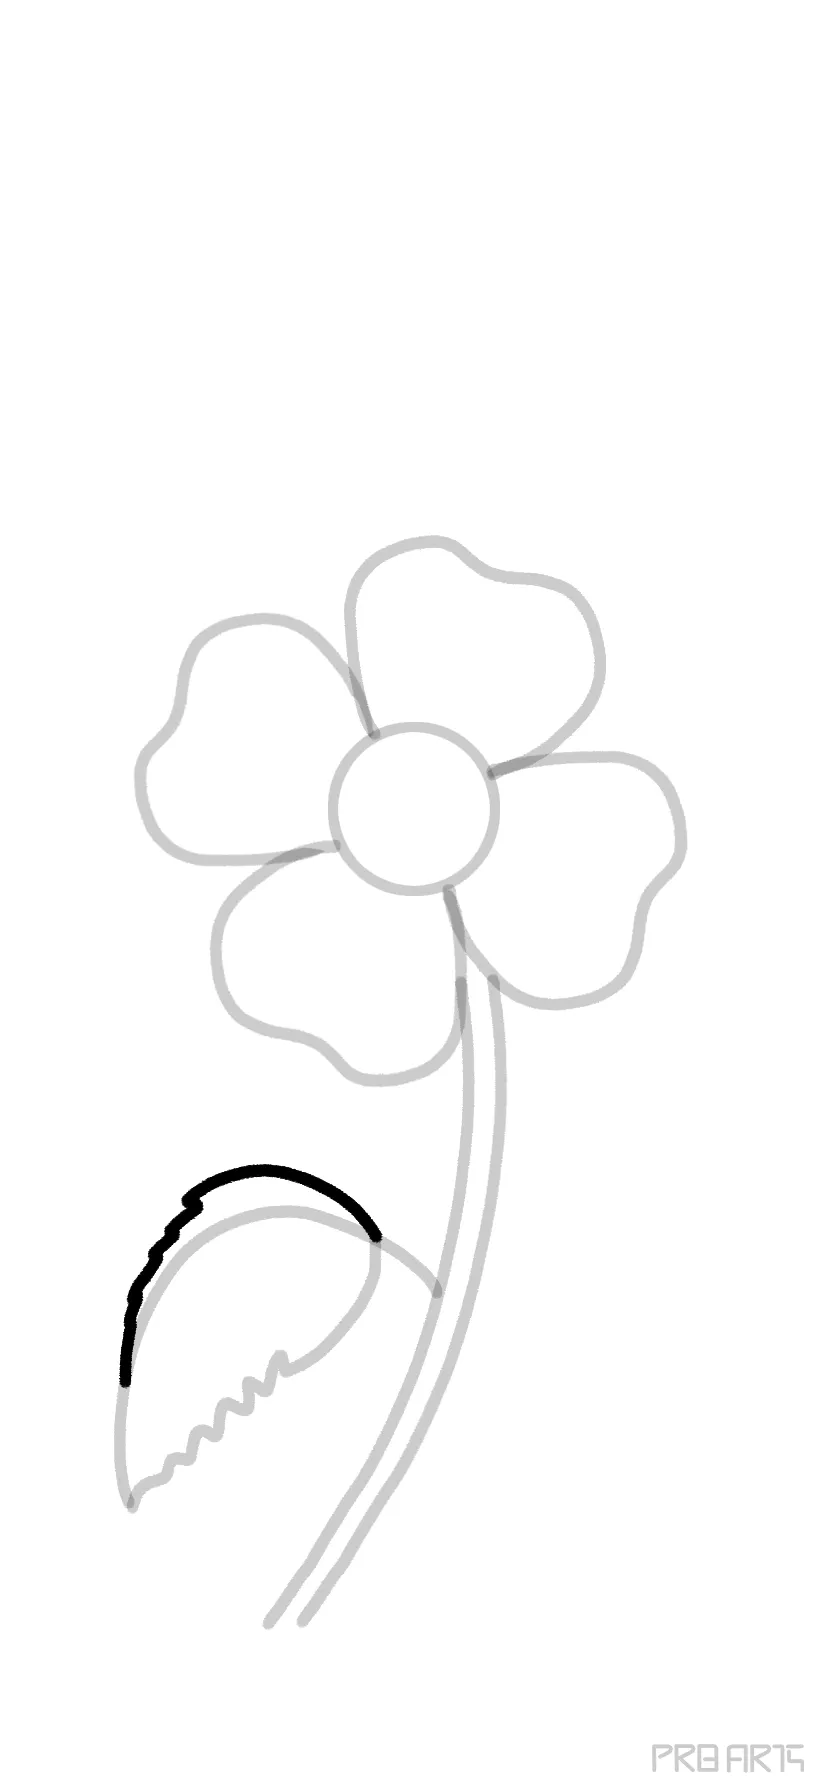 35 Easy Ways of How To Draw a Flower